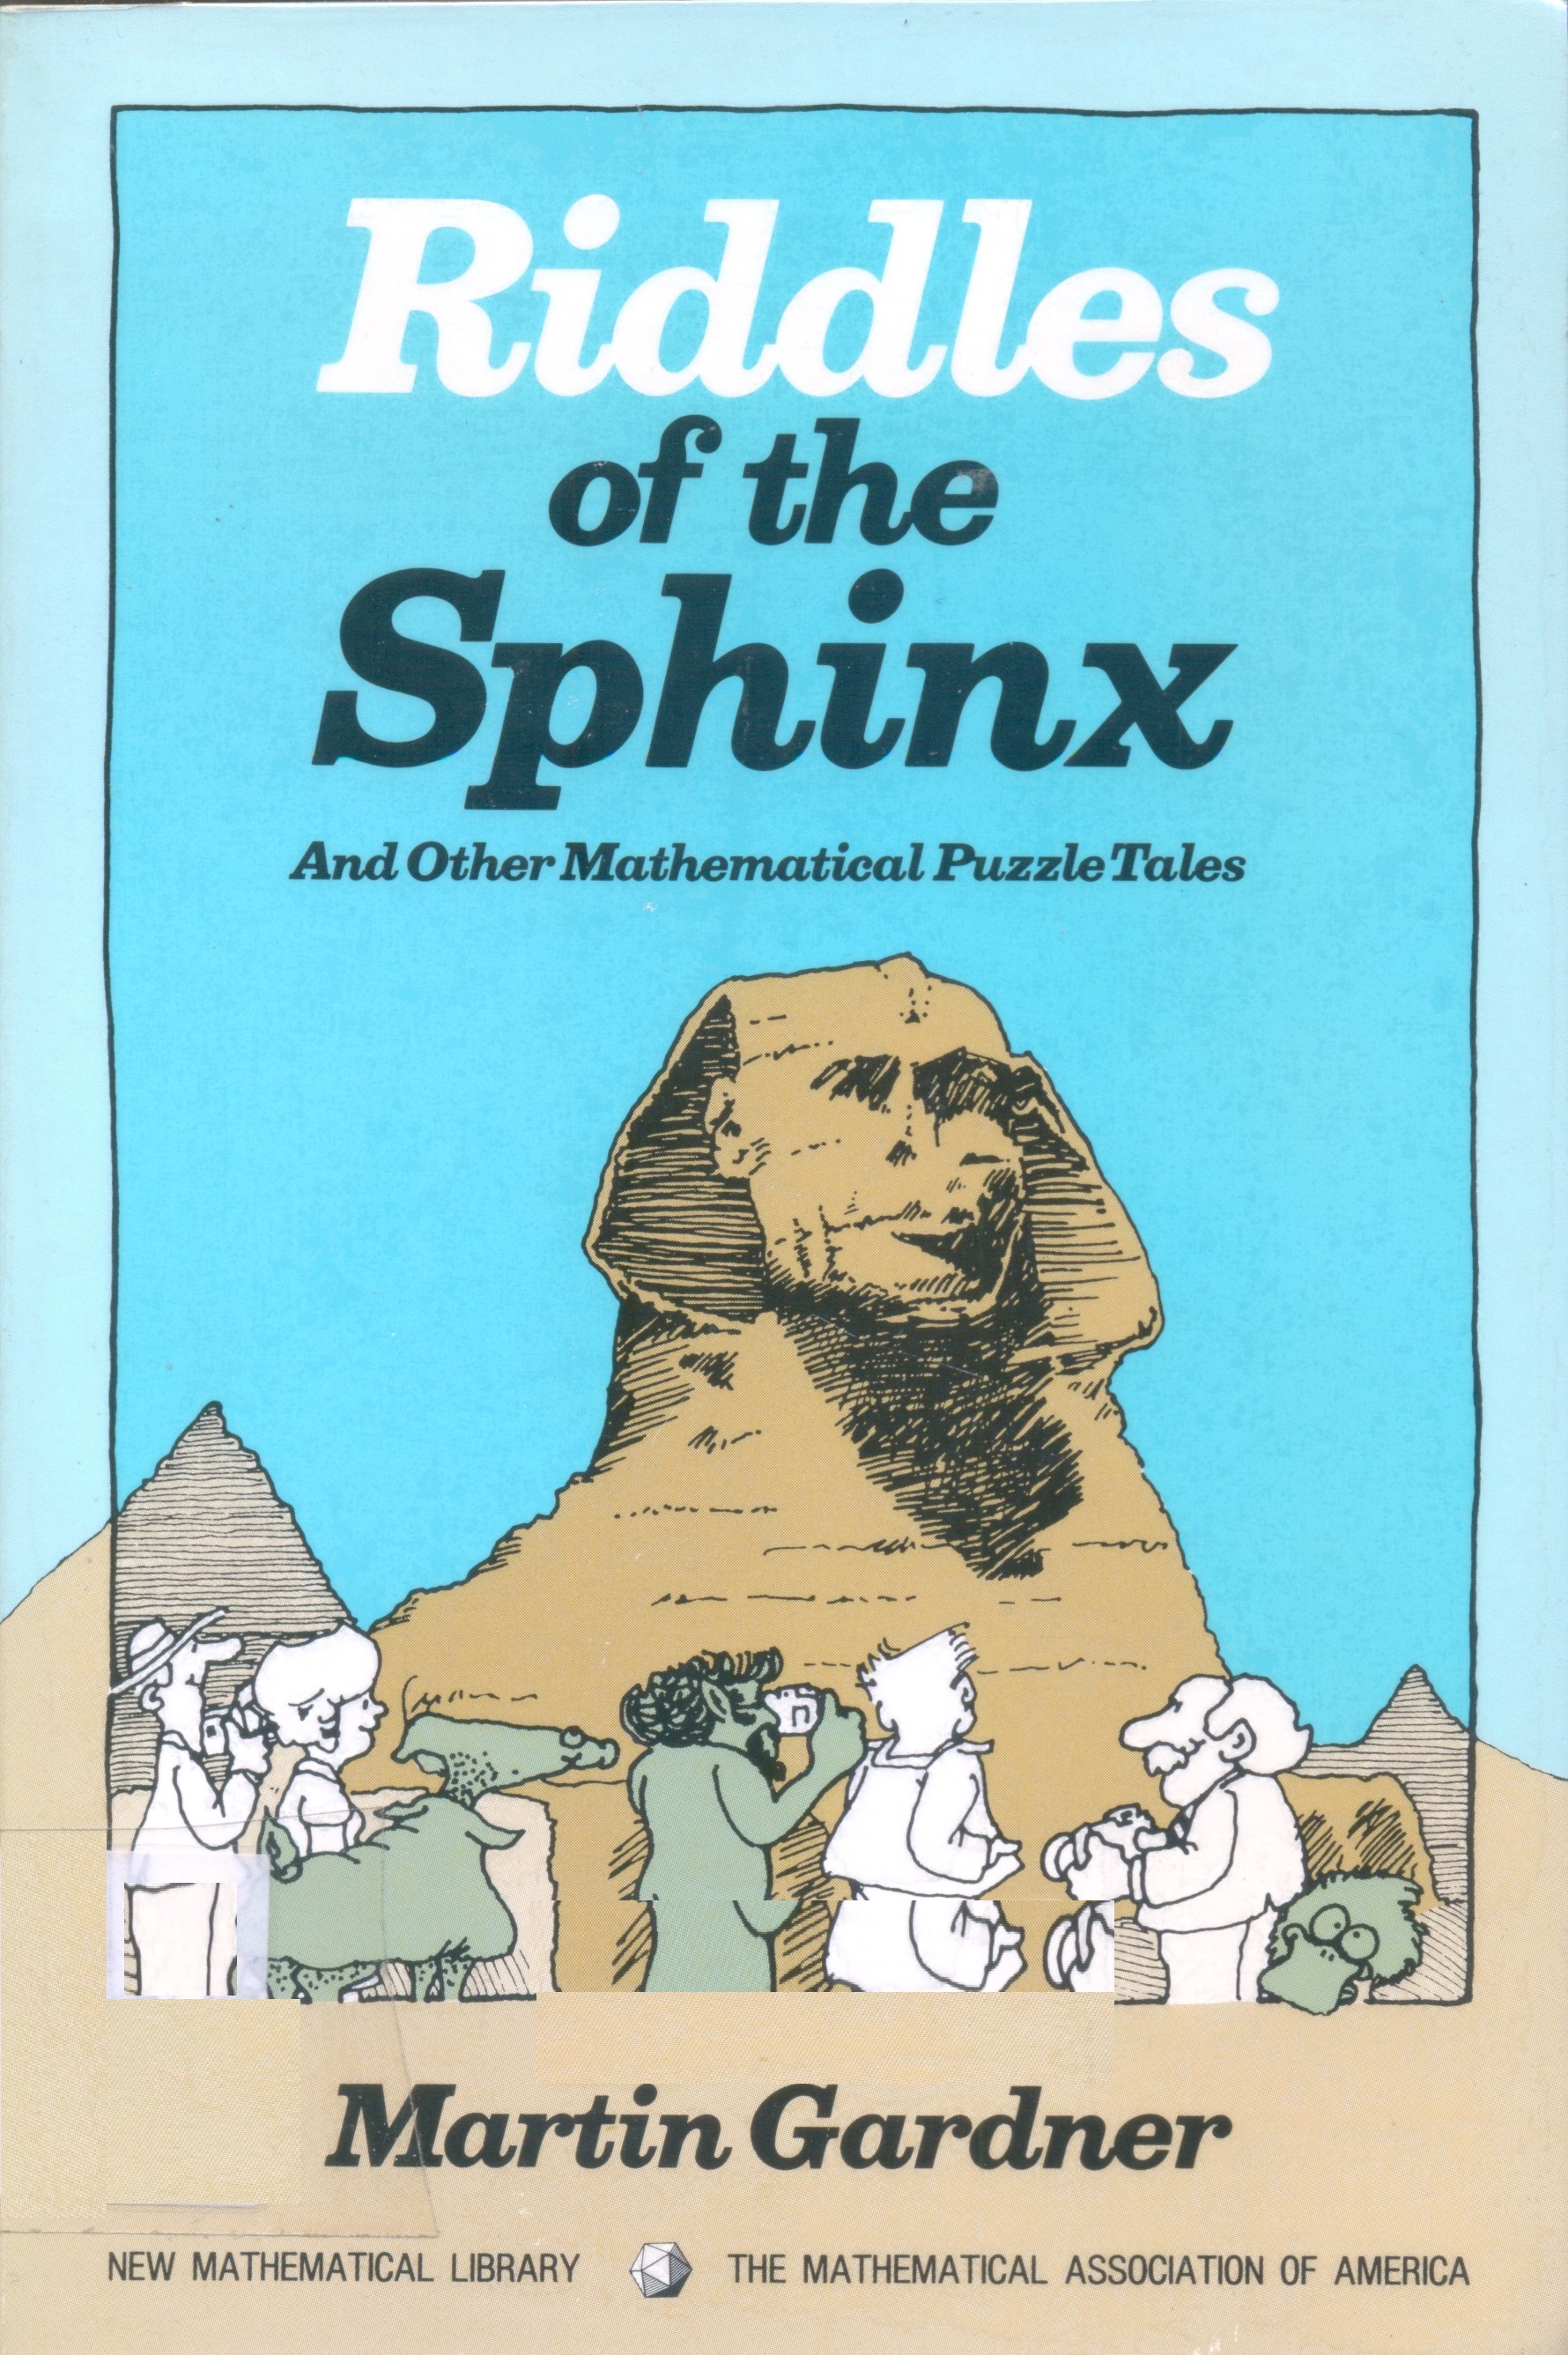 Riddles of the sphinx, and other mathematical puzzle tales / by Martin Gardner